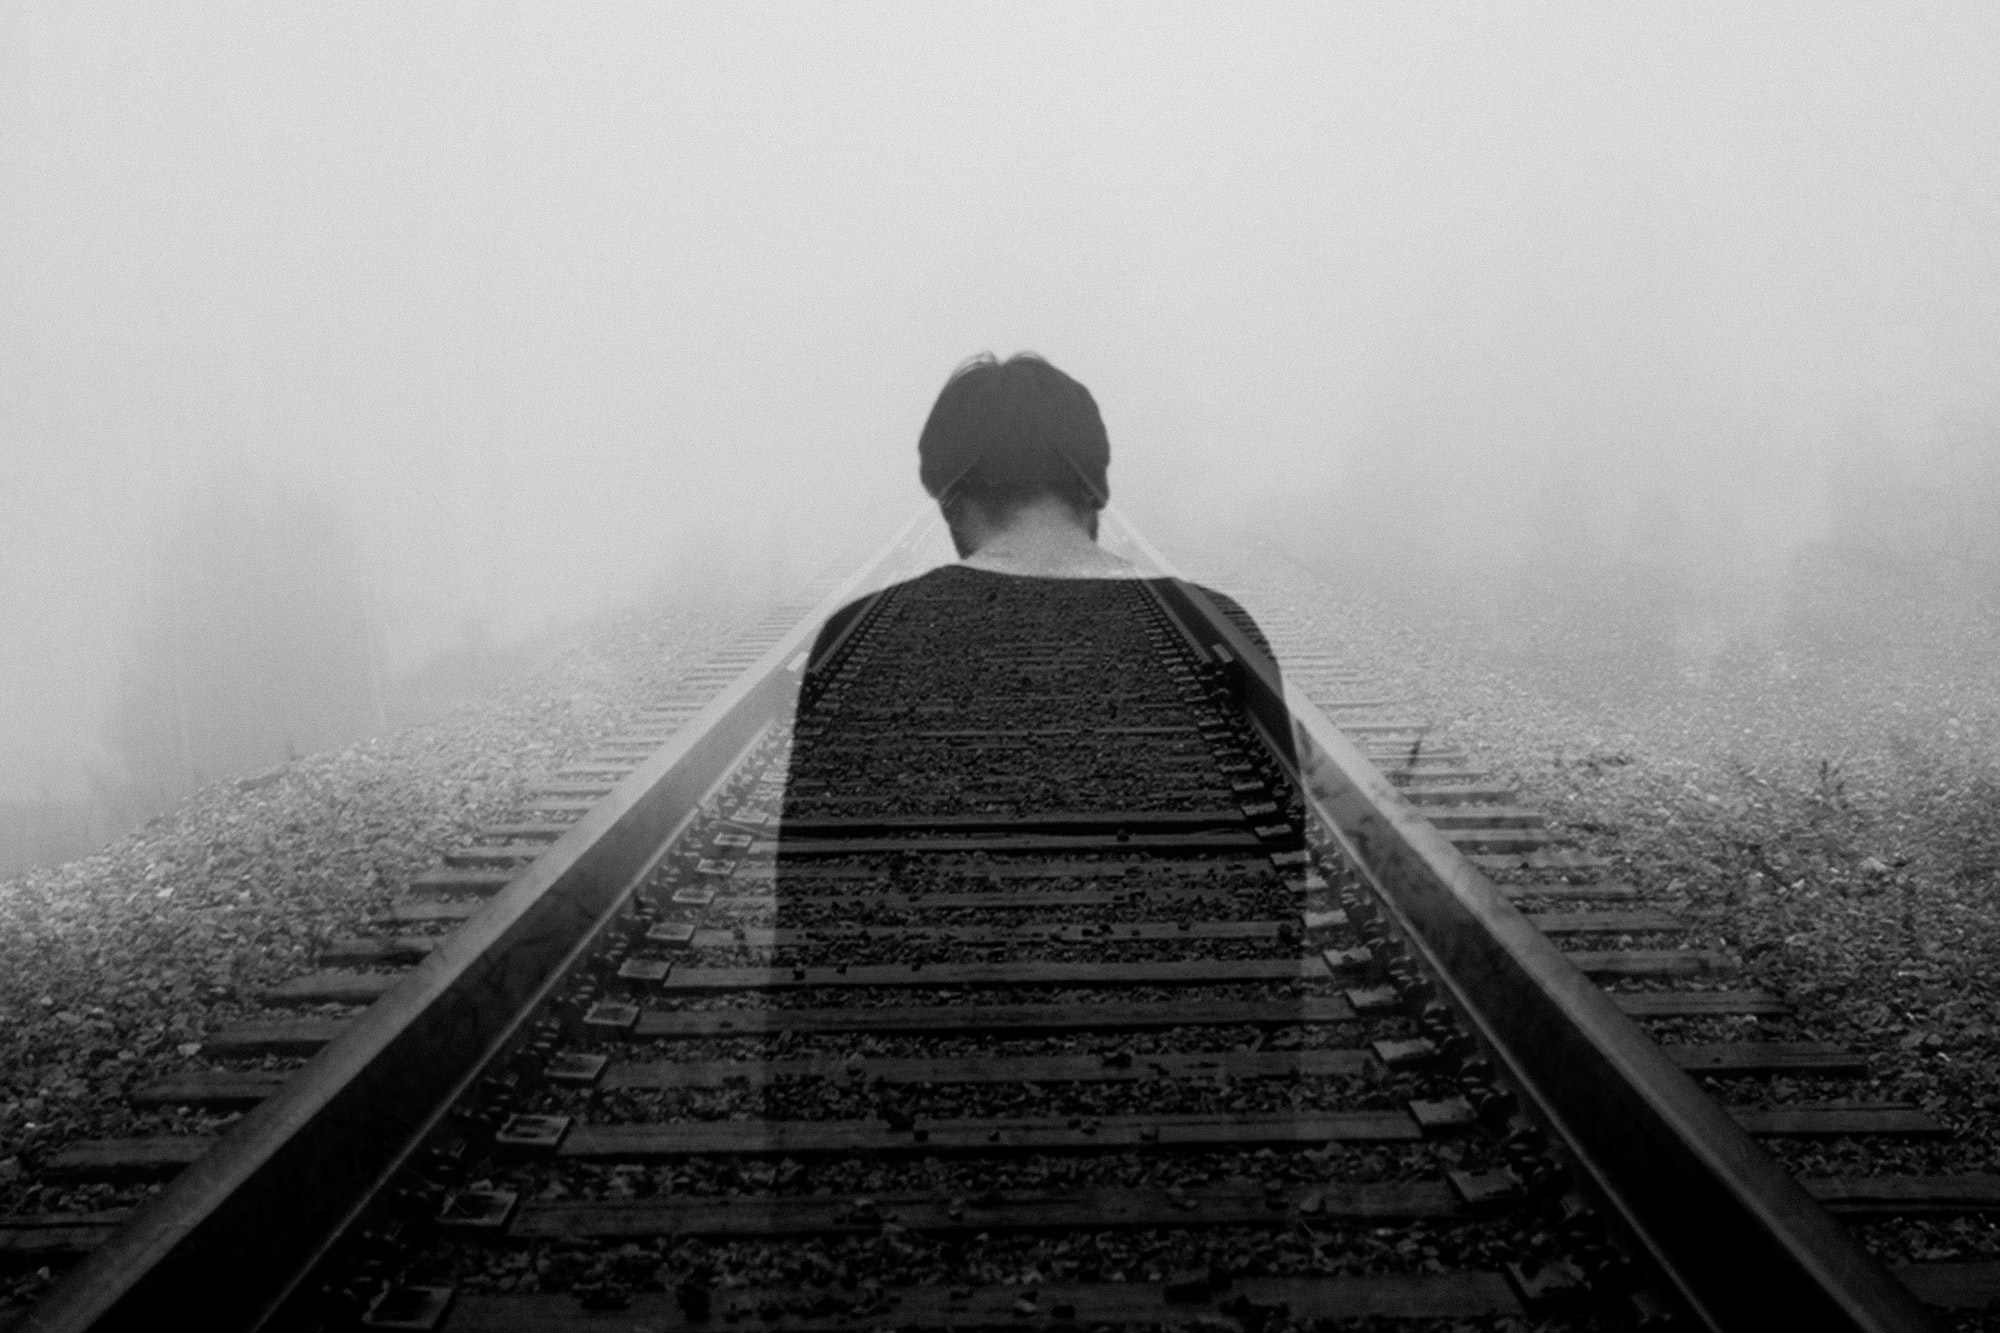 Black and white image of man looking depressed, sad, and lonely. Image links to webpage describing depression and its treatment.